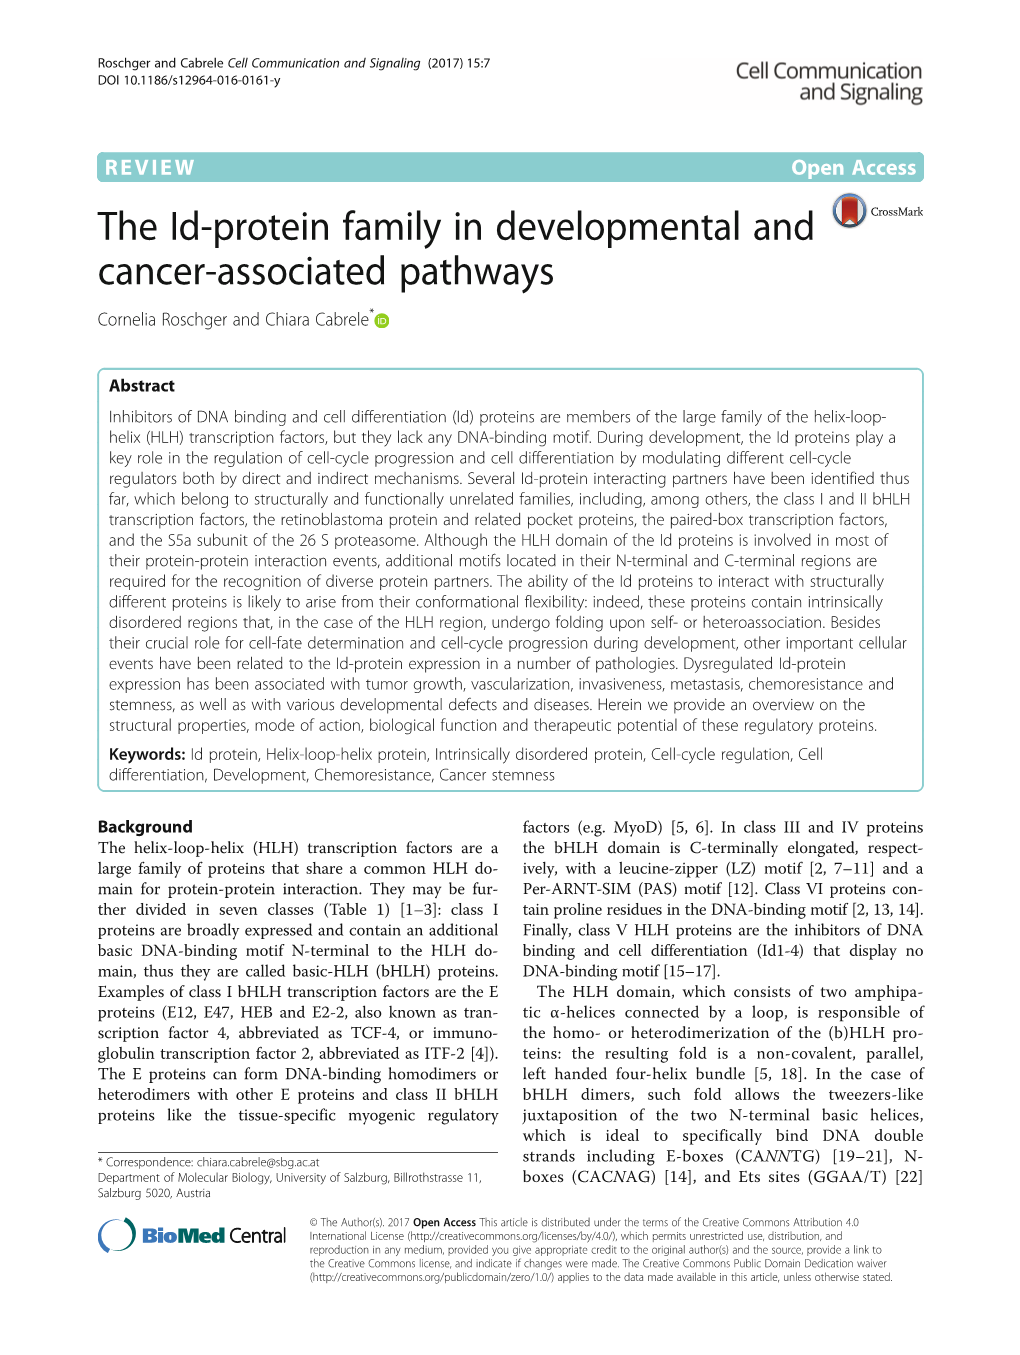 The Id-Protein Family in Developmental and Cancer-Associated Pathways Cornelia Roschger and Chiara Cabrele*